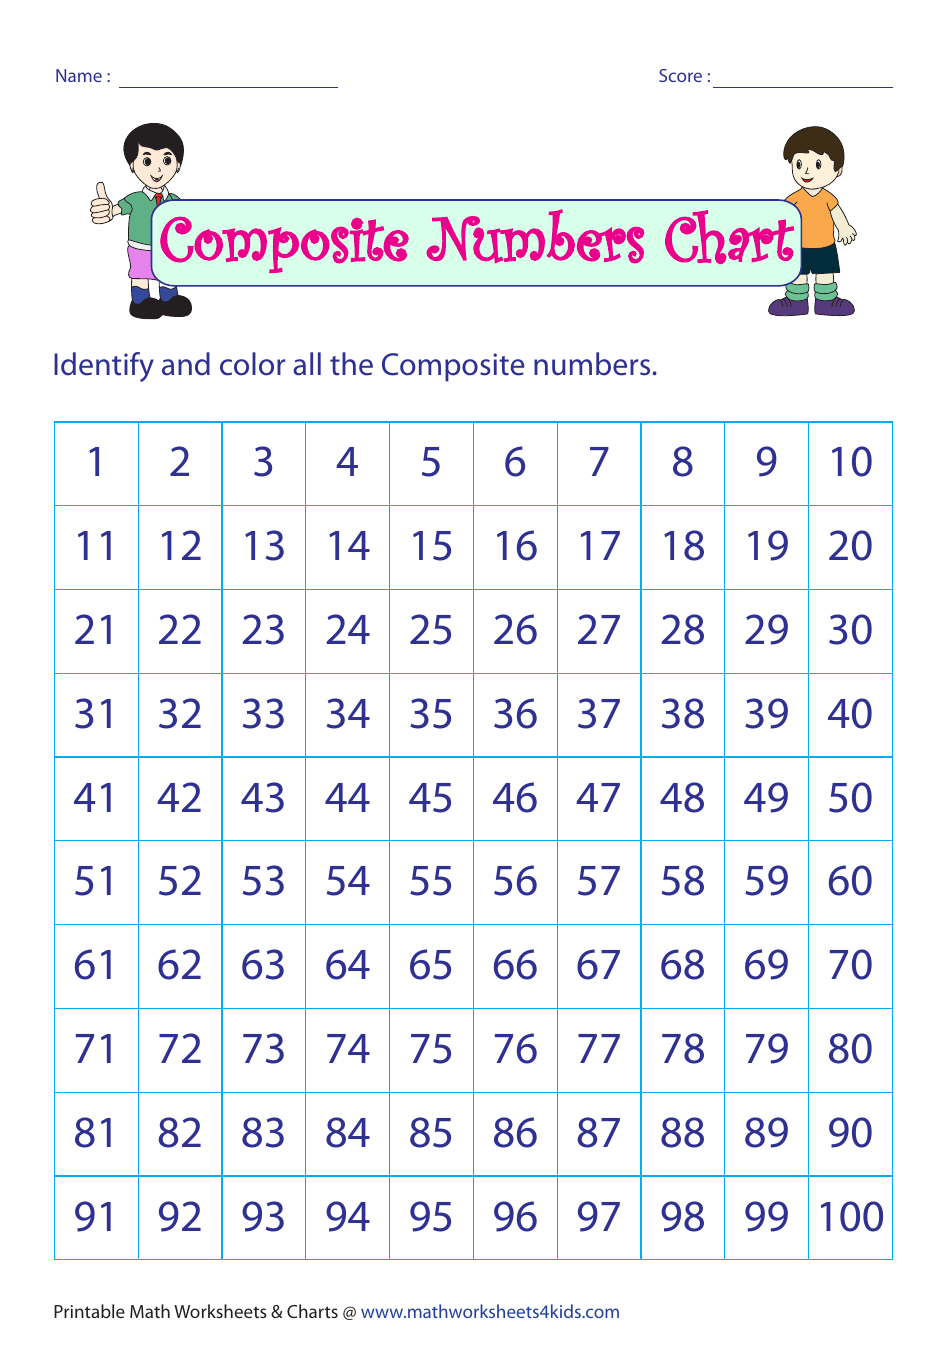 composite numbers chart worksheet with answer key download printable pdf templateroller